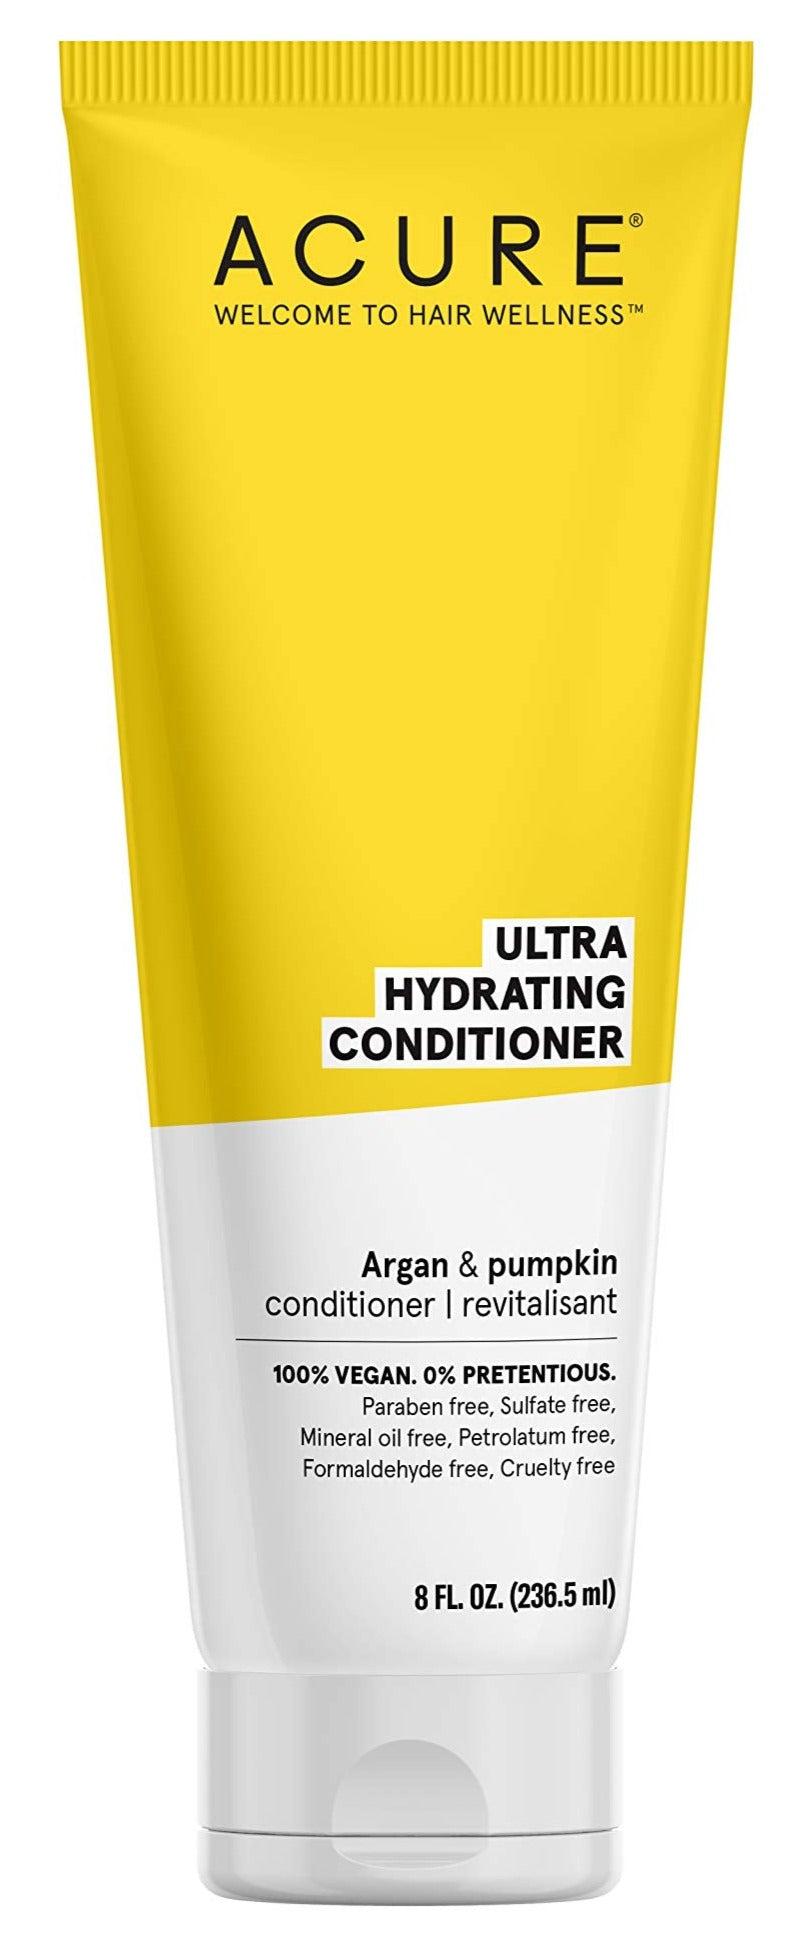 Acure Ultra Hydrating Conditioner - MeStore